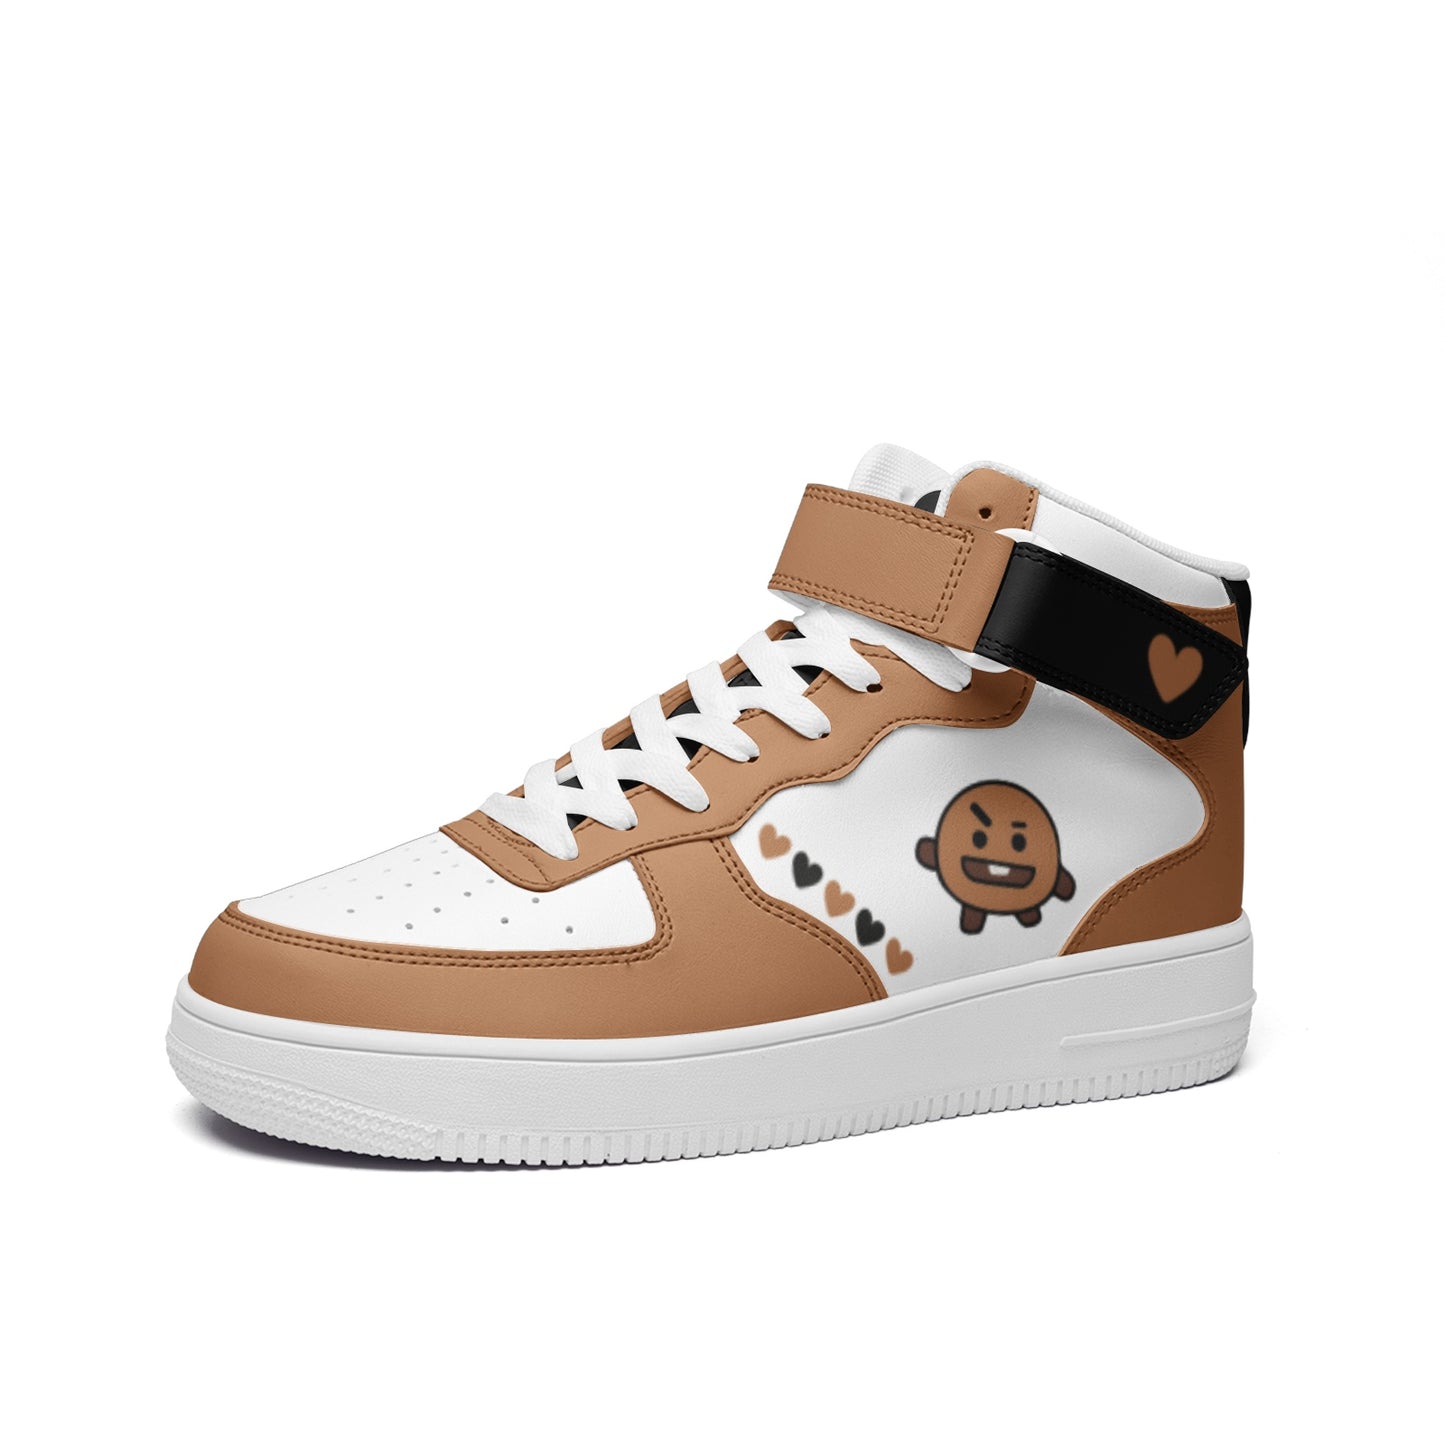 BT21 Shooky Unisex high Top Leather Sneakers